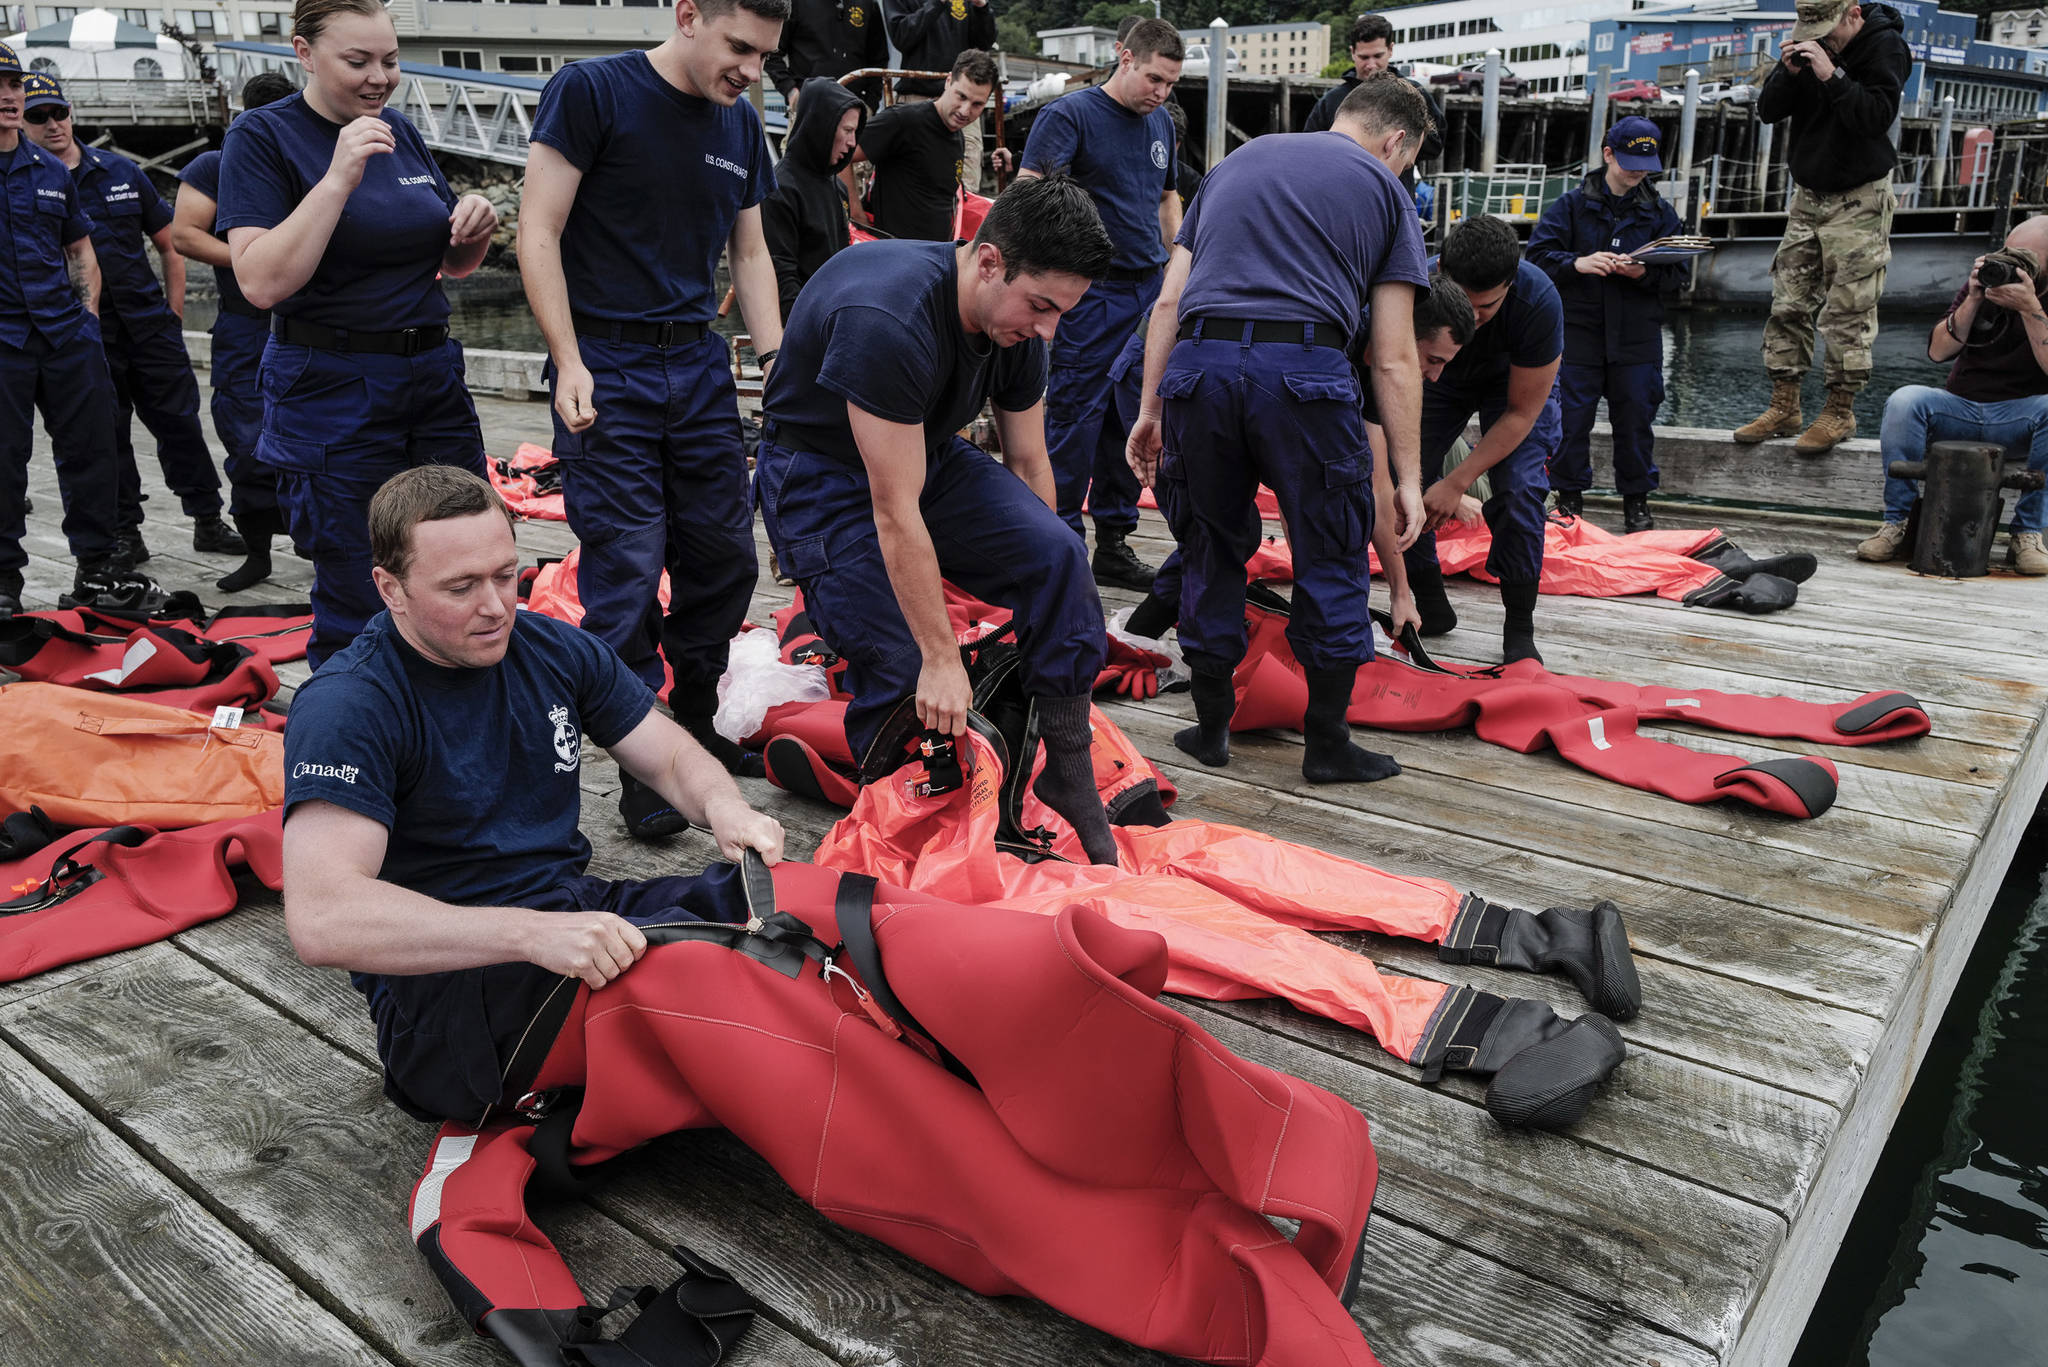 Members of the U.S. Coast Guard, U.S.C.G Dive Team, U.S. Army Dive Team and the Canadian Coast Guard participate in the annual Buoy Tender Olympics at Station Juneau on Wednesday, Aug. 21, 2019. (Michael Penn | Juneau Empire)